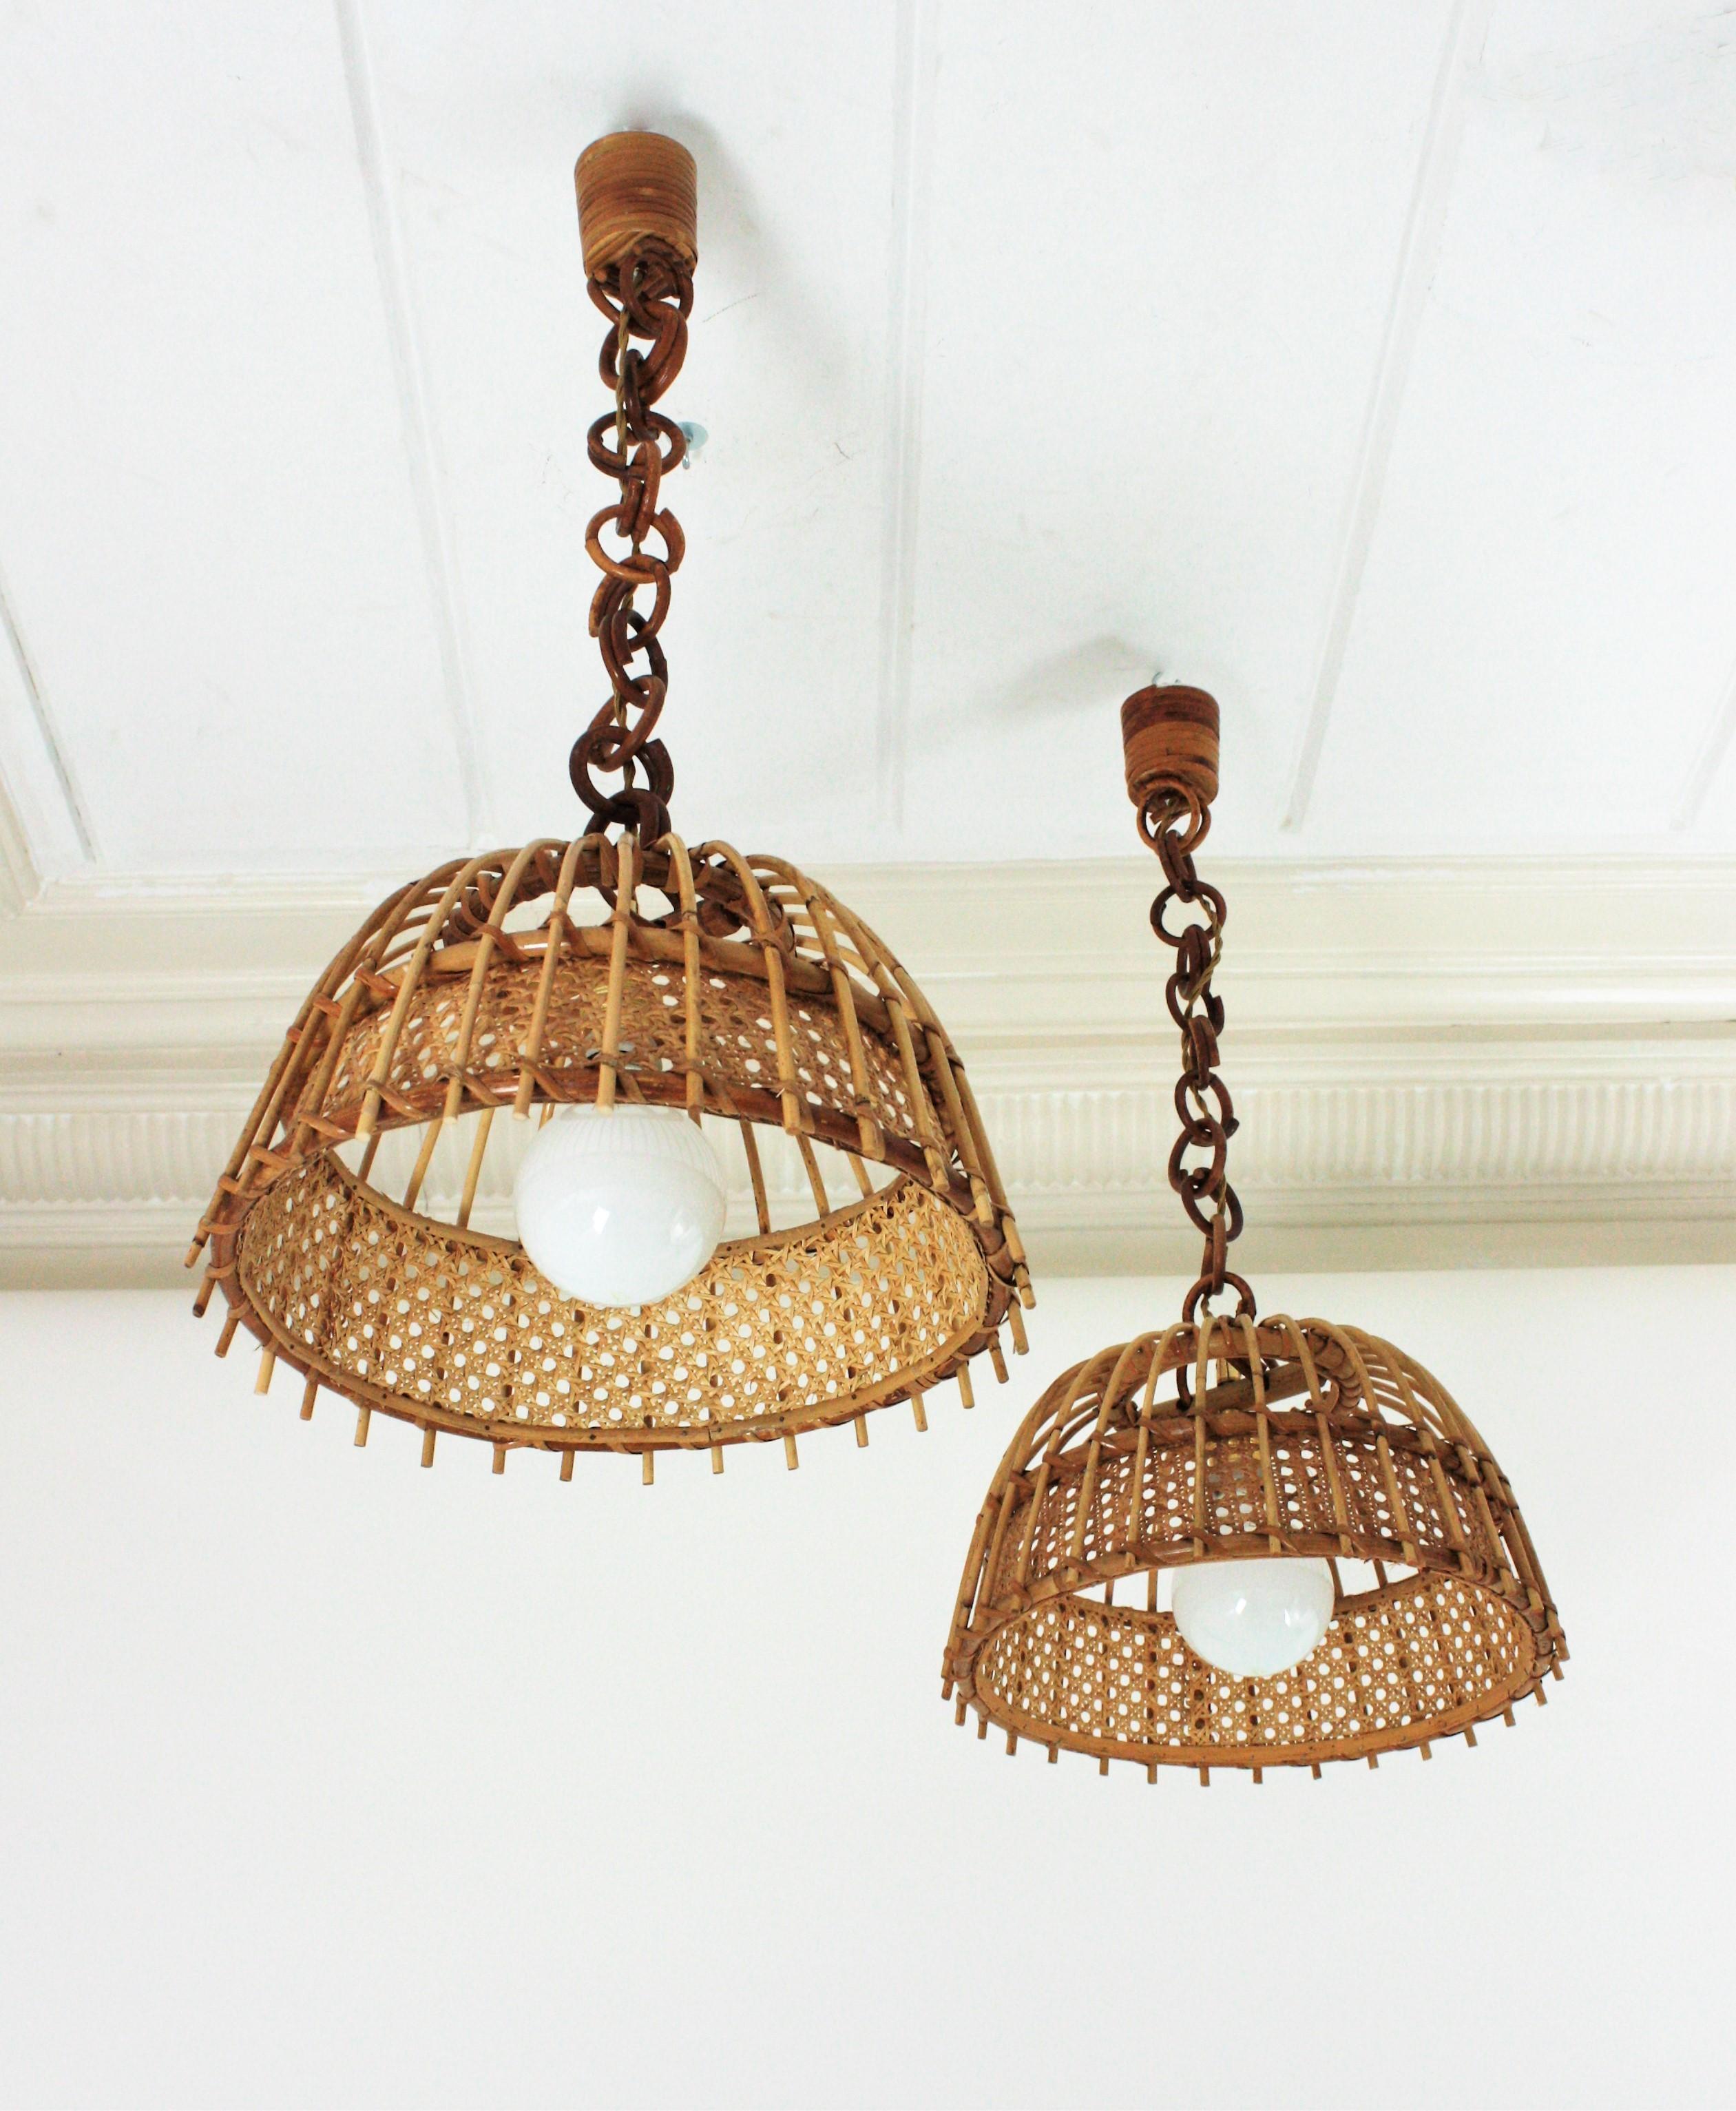 Spanish modernist rattan and wicker weave suspension lamps with bell shaped shades, Spain, 1960s.
These pendats feature a rattan bell shaped shade with vertical canes accented a woven wicker wire horizontal band.
They hang from chains with round